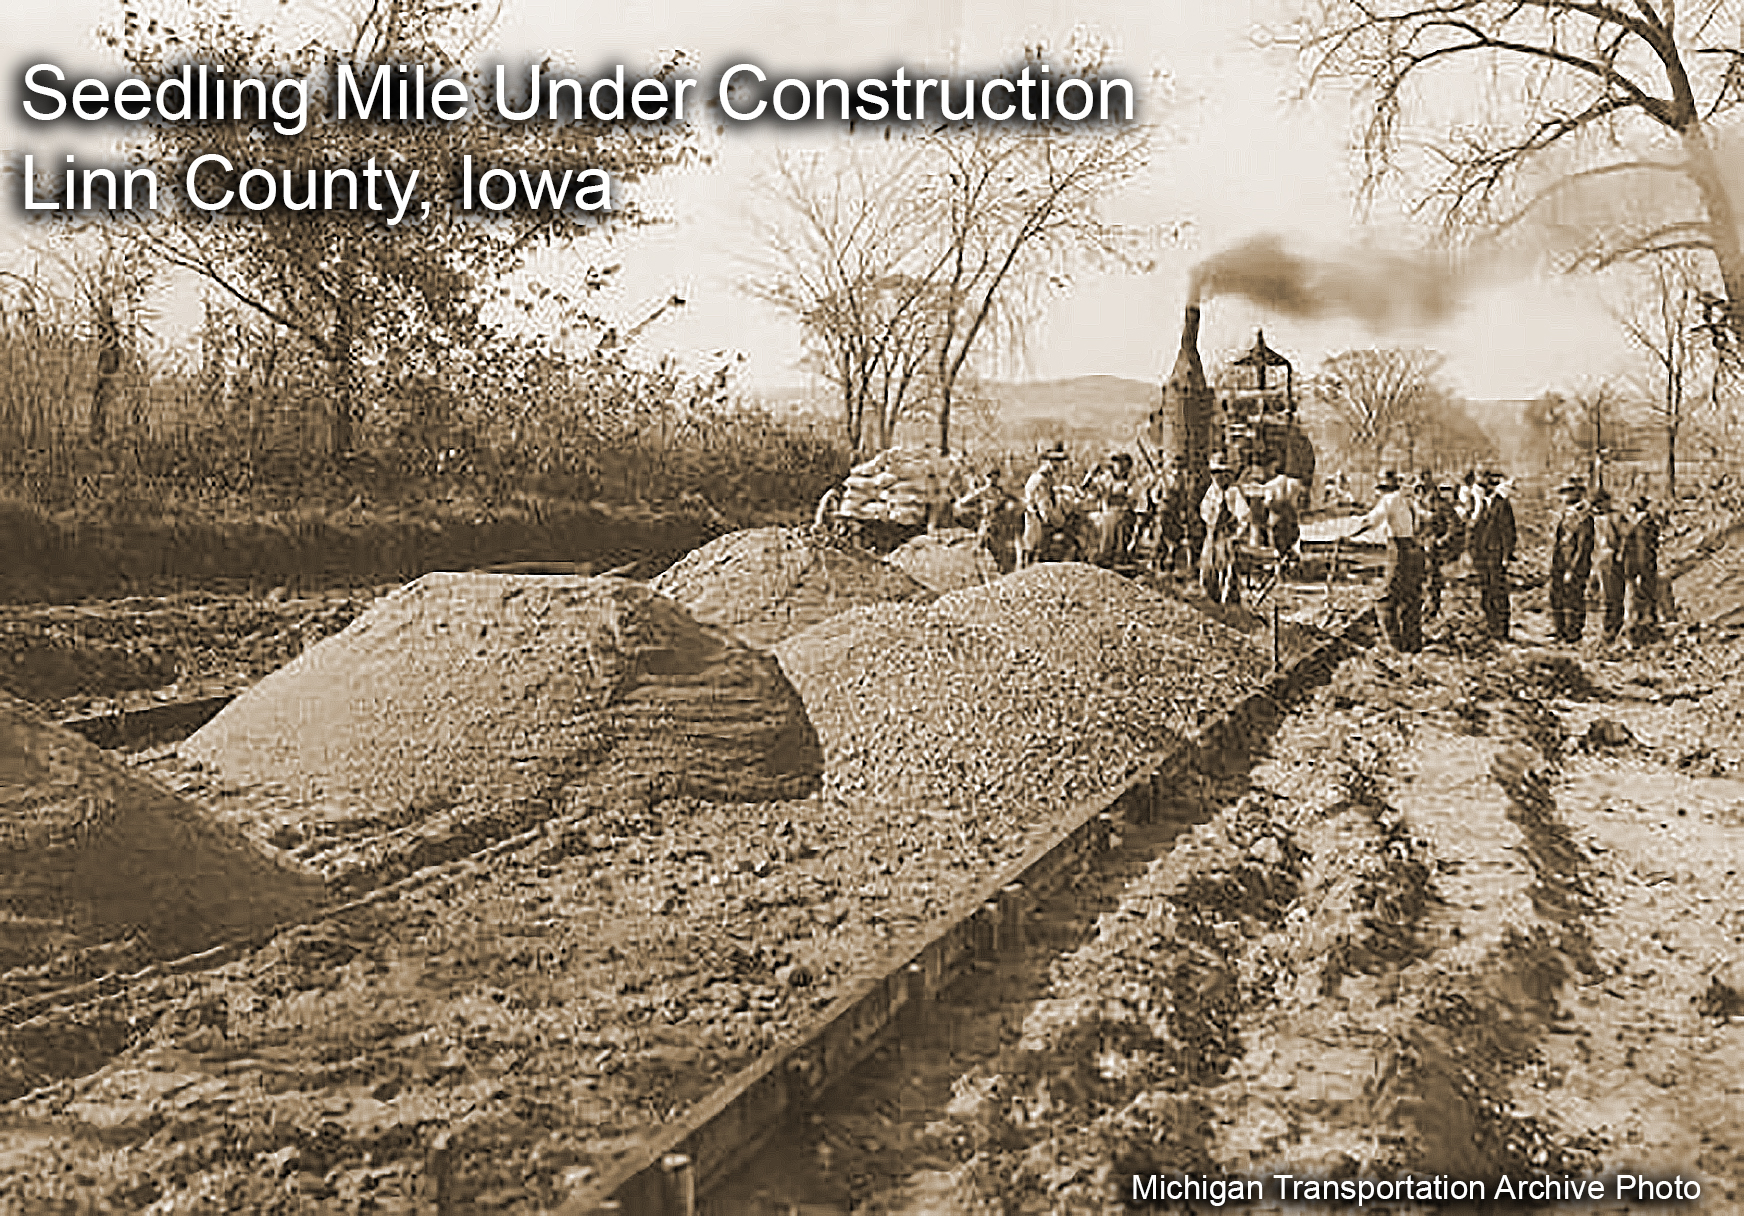 Seedling Mile Under Construction in Linn County, Iowa